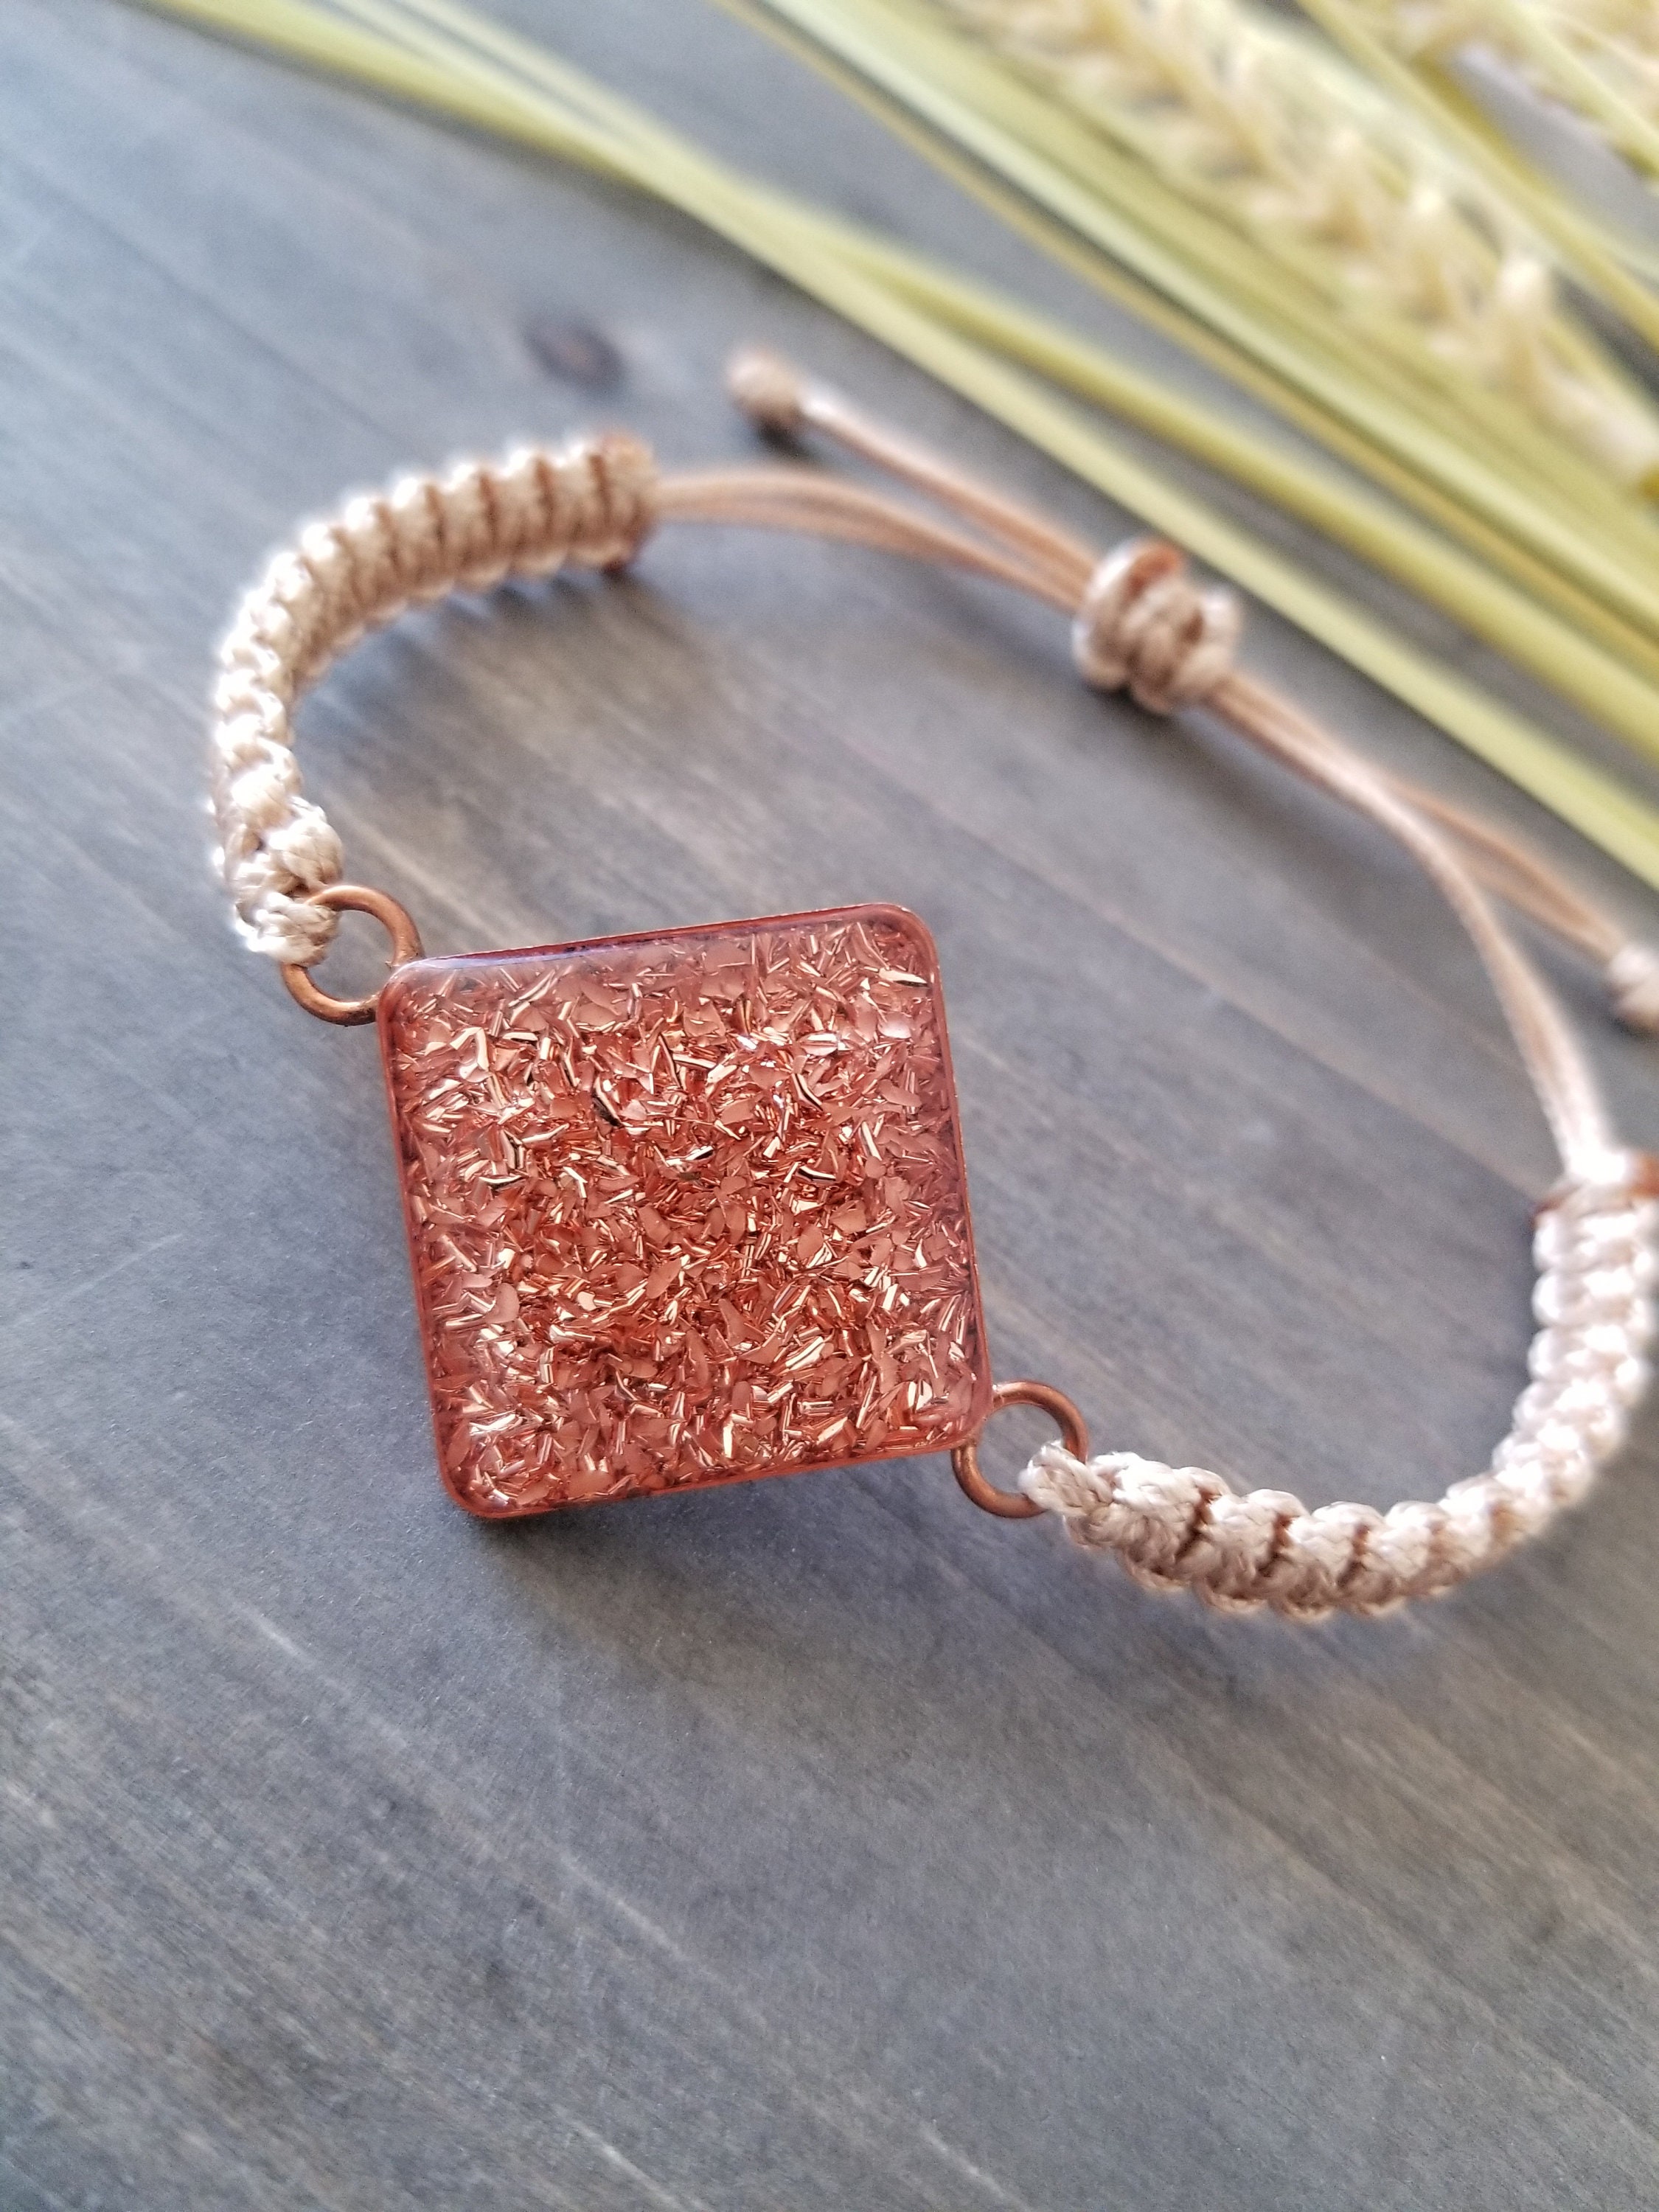 Copper Jewelry Connector